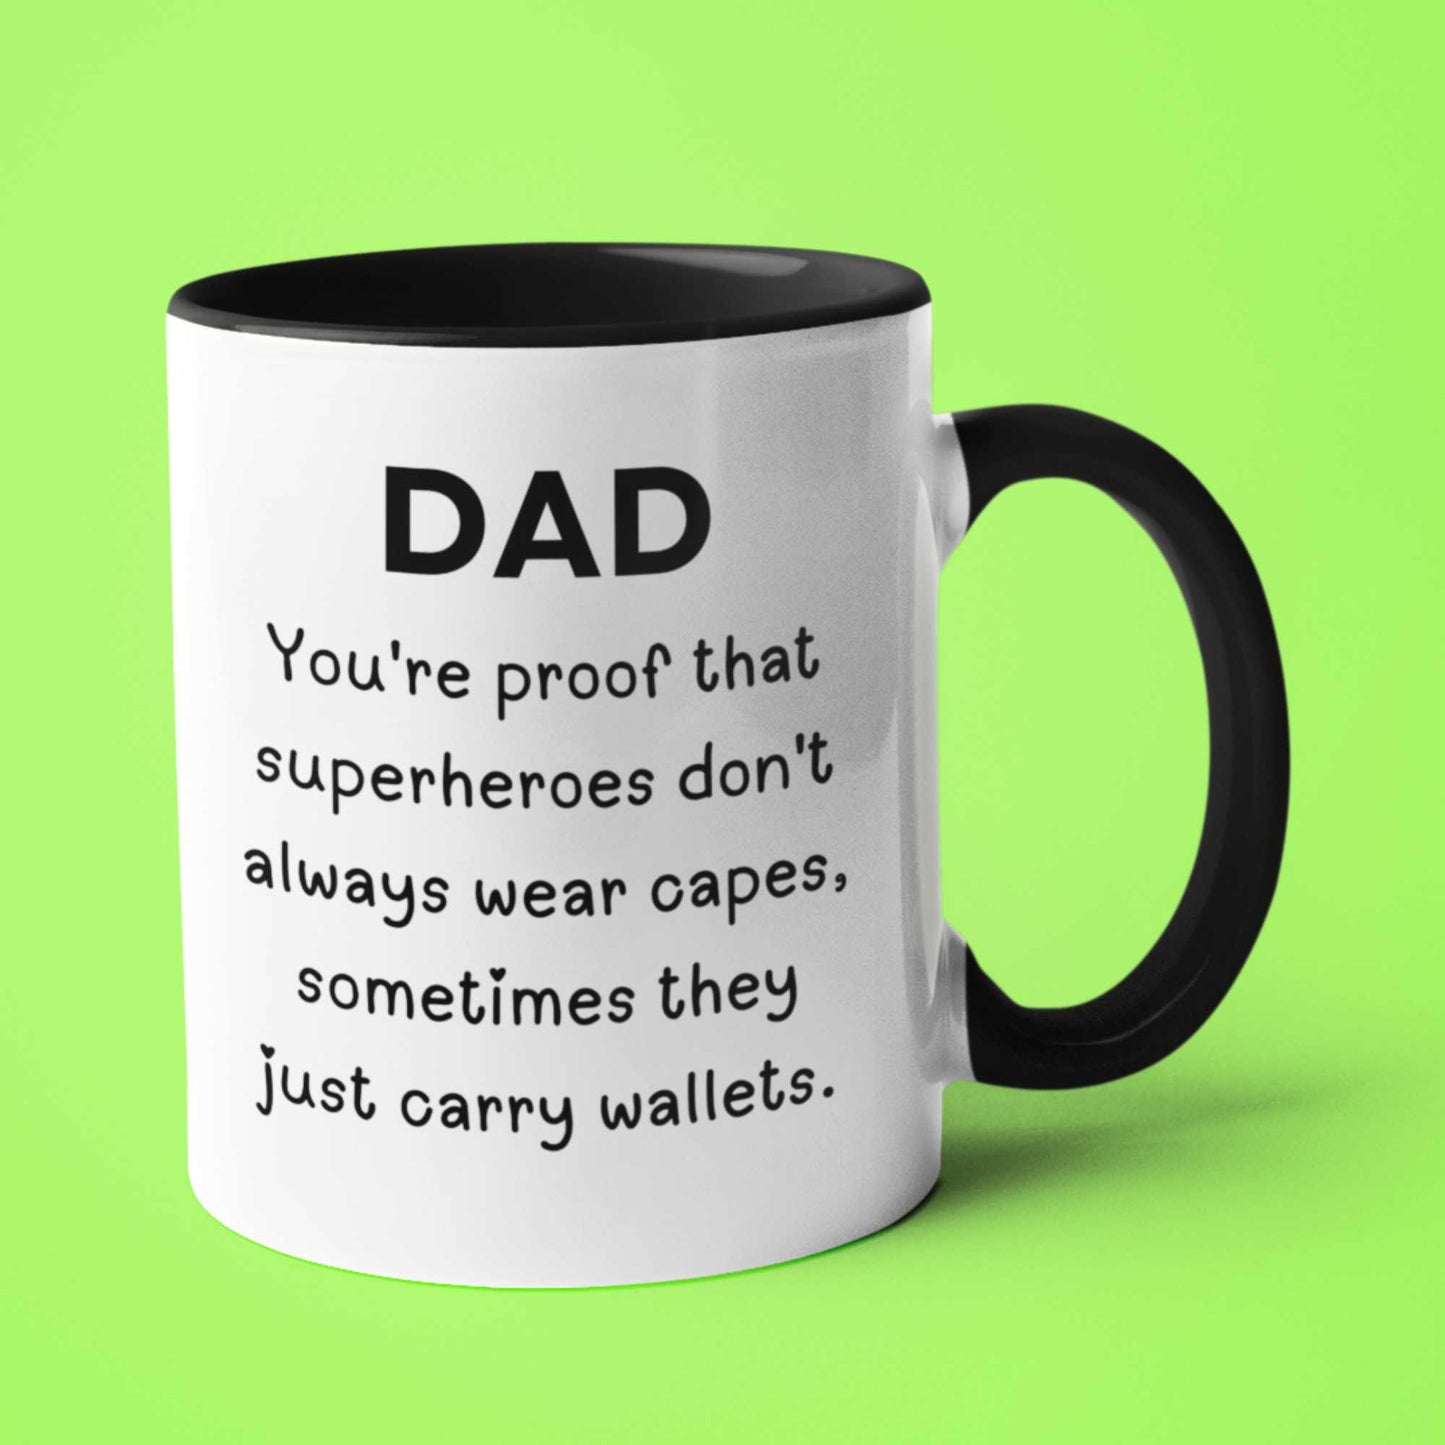 Funny Dad Superheroes capes Just Carry Wallets Mug for Fathers Day Birthday or Christmas Gift